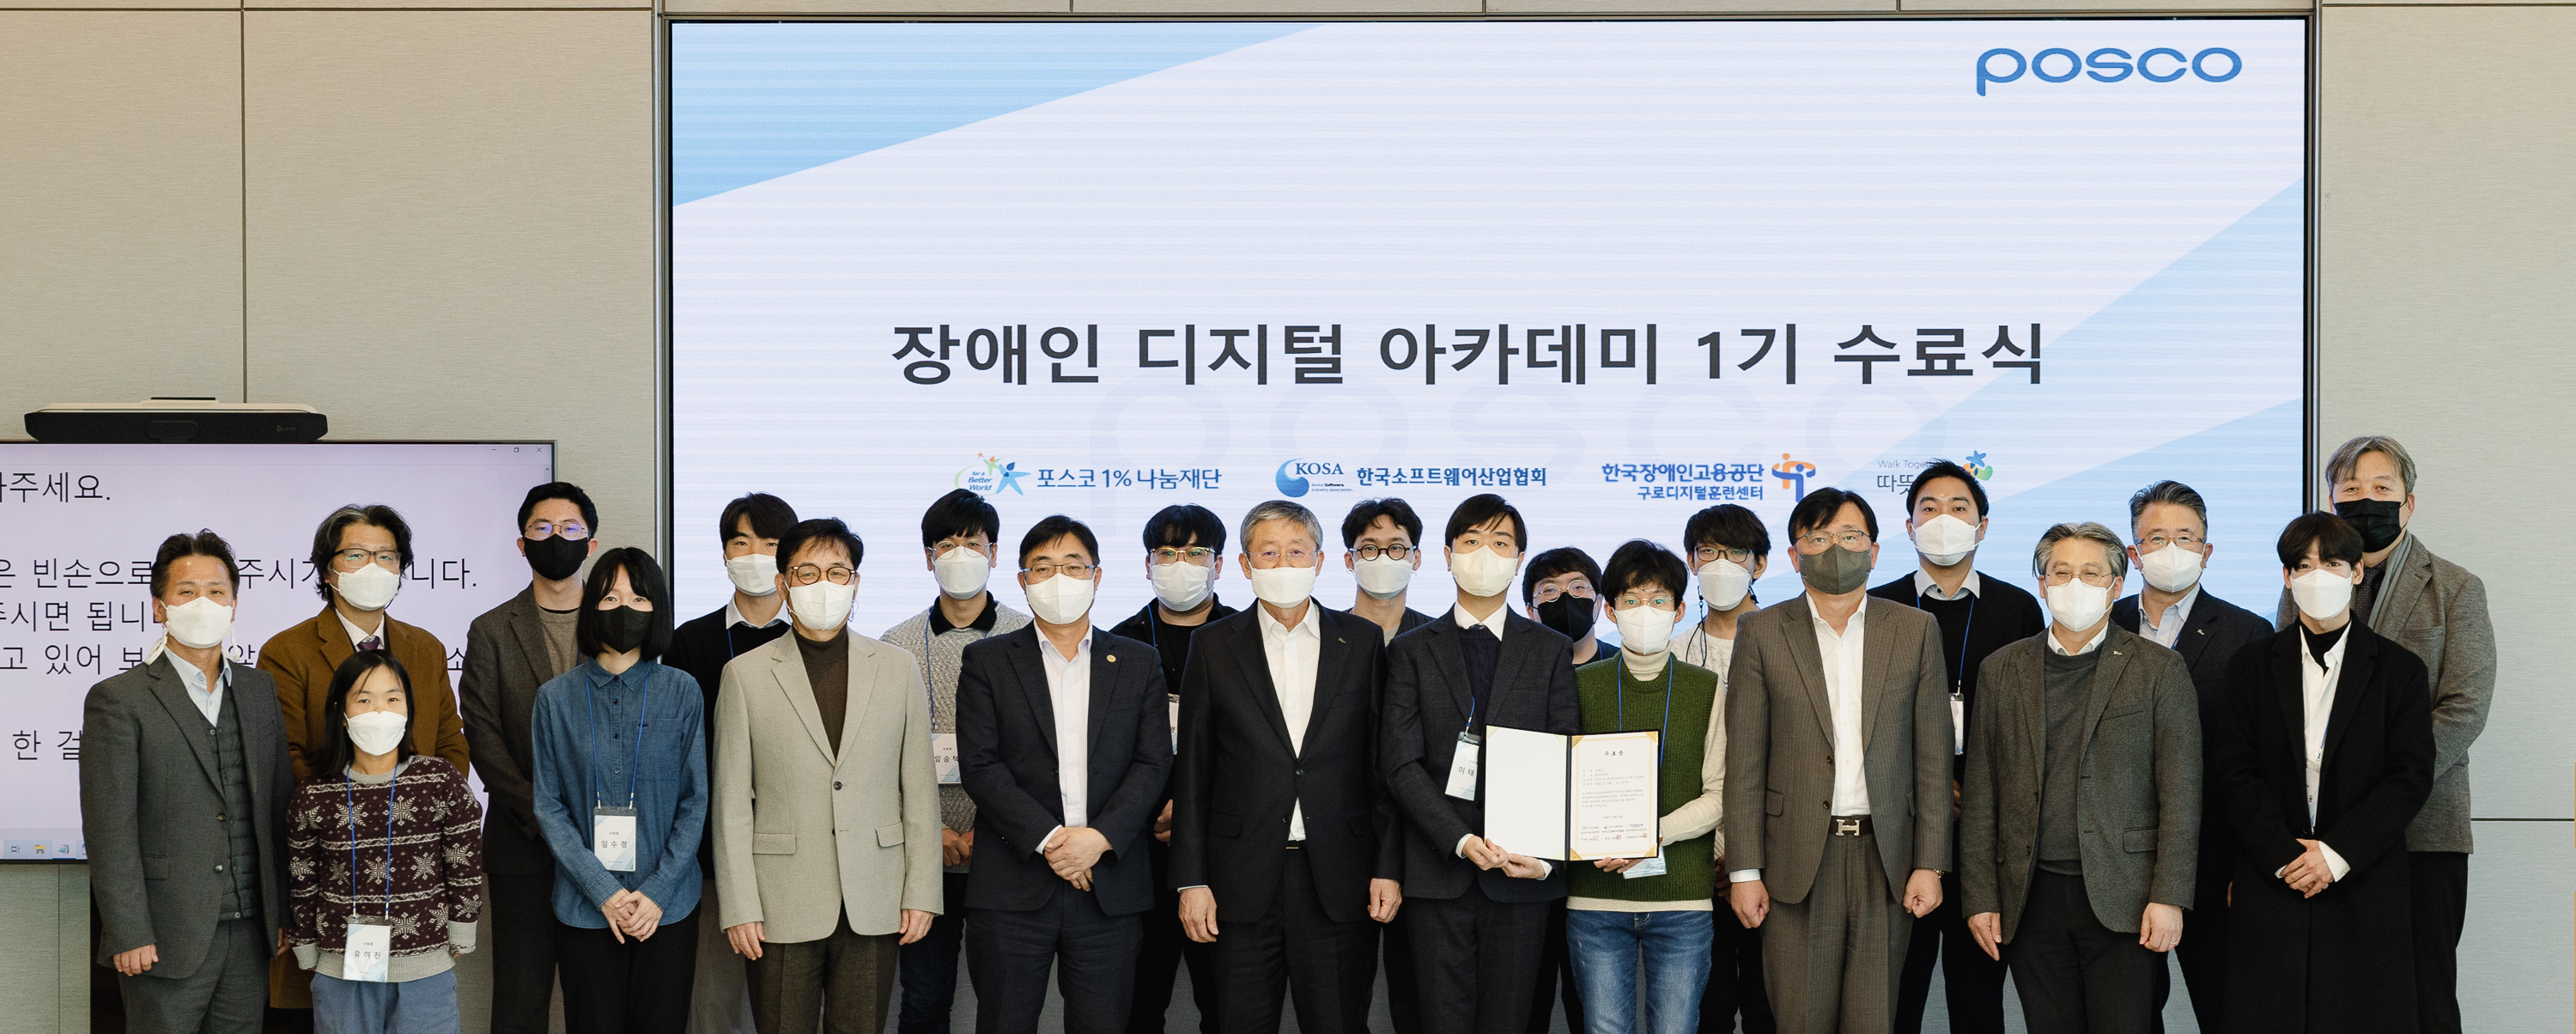 POSCO 1% Foundation’s Digital Academy for the Disabled Graduates its First Class